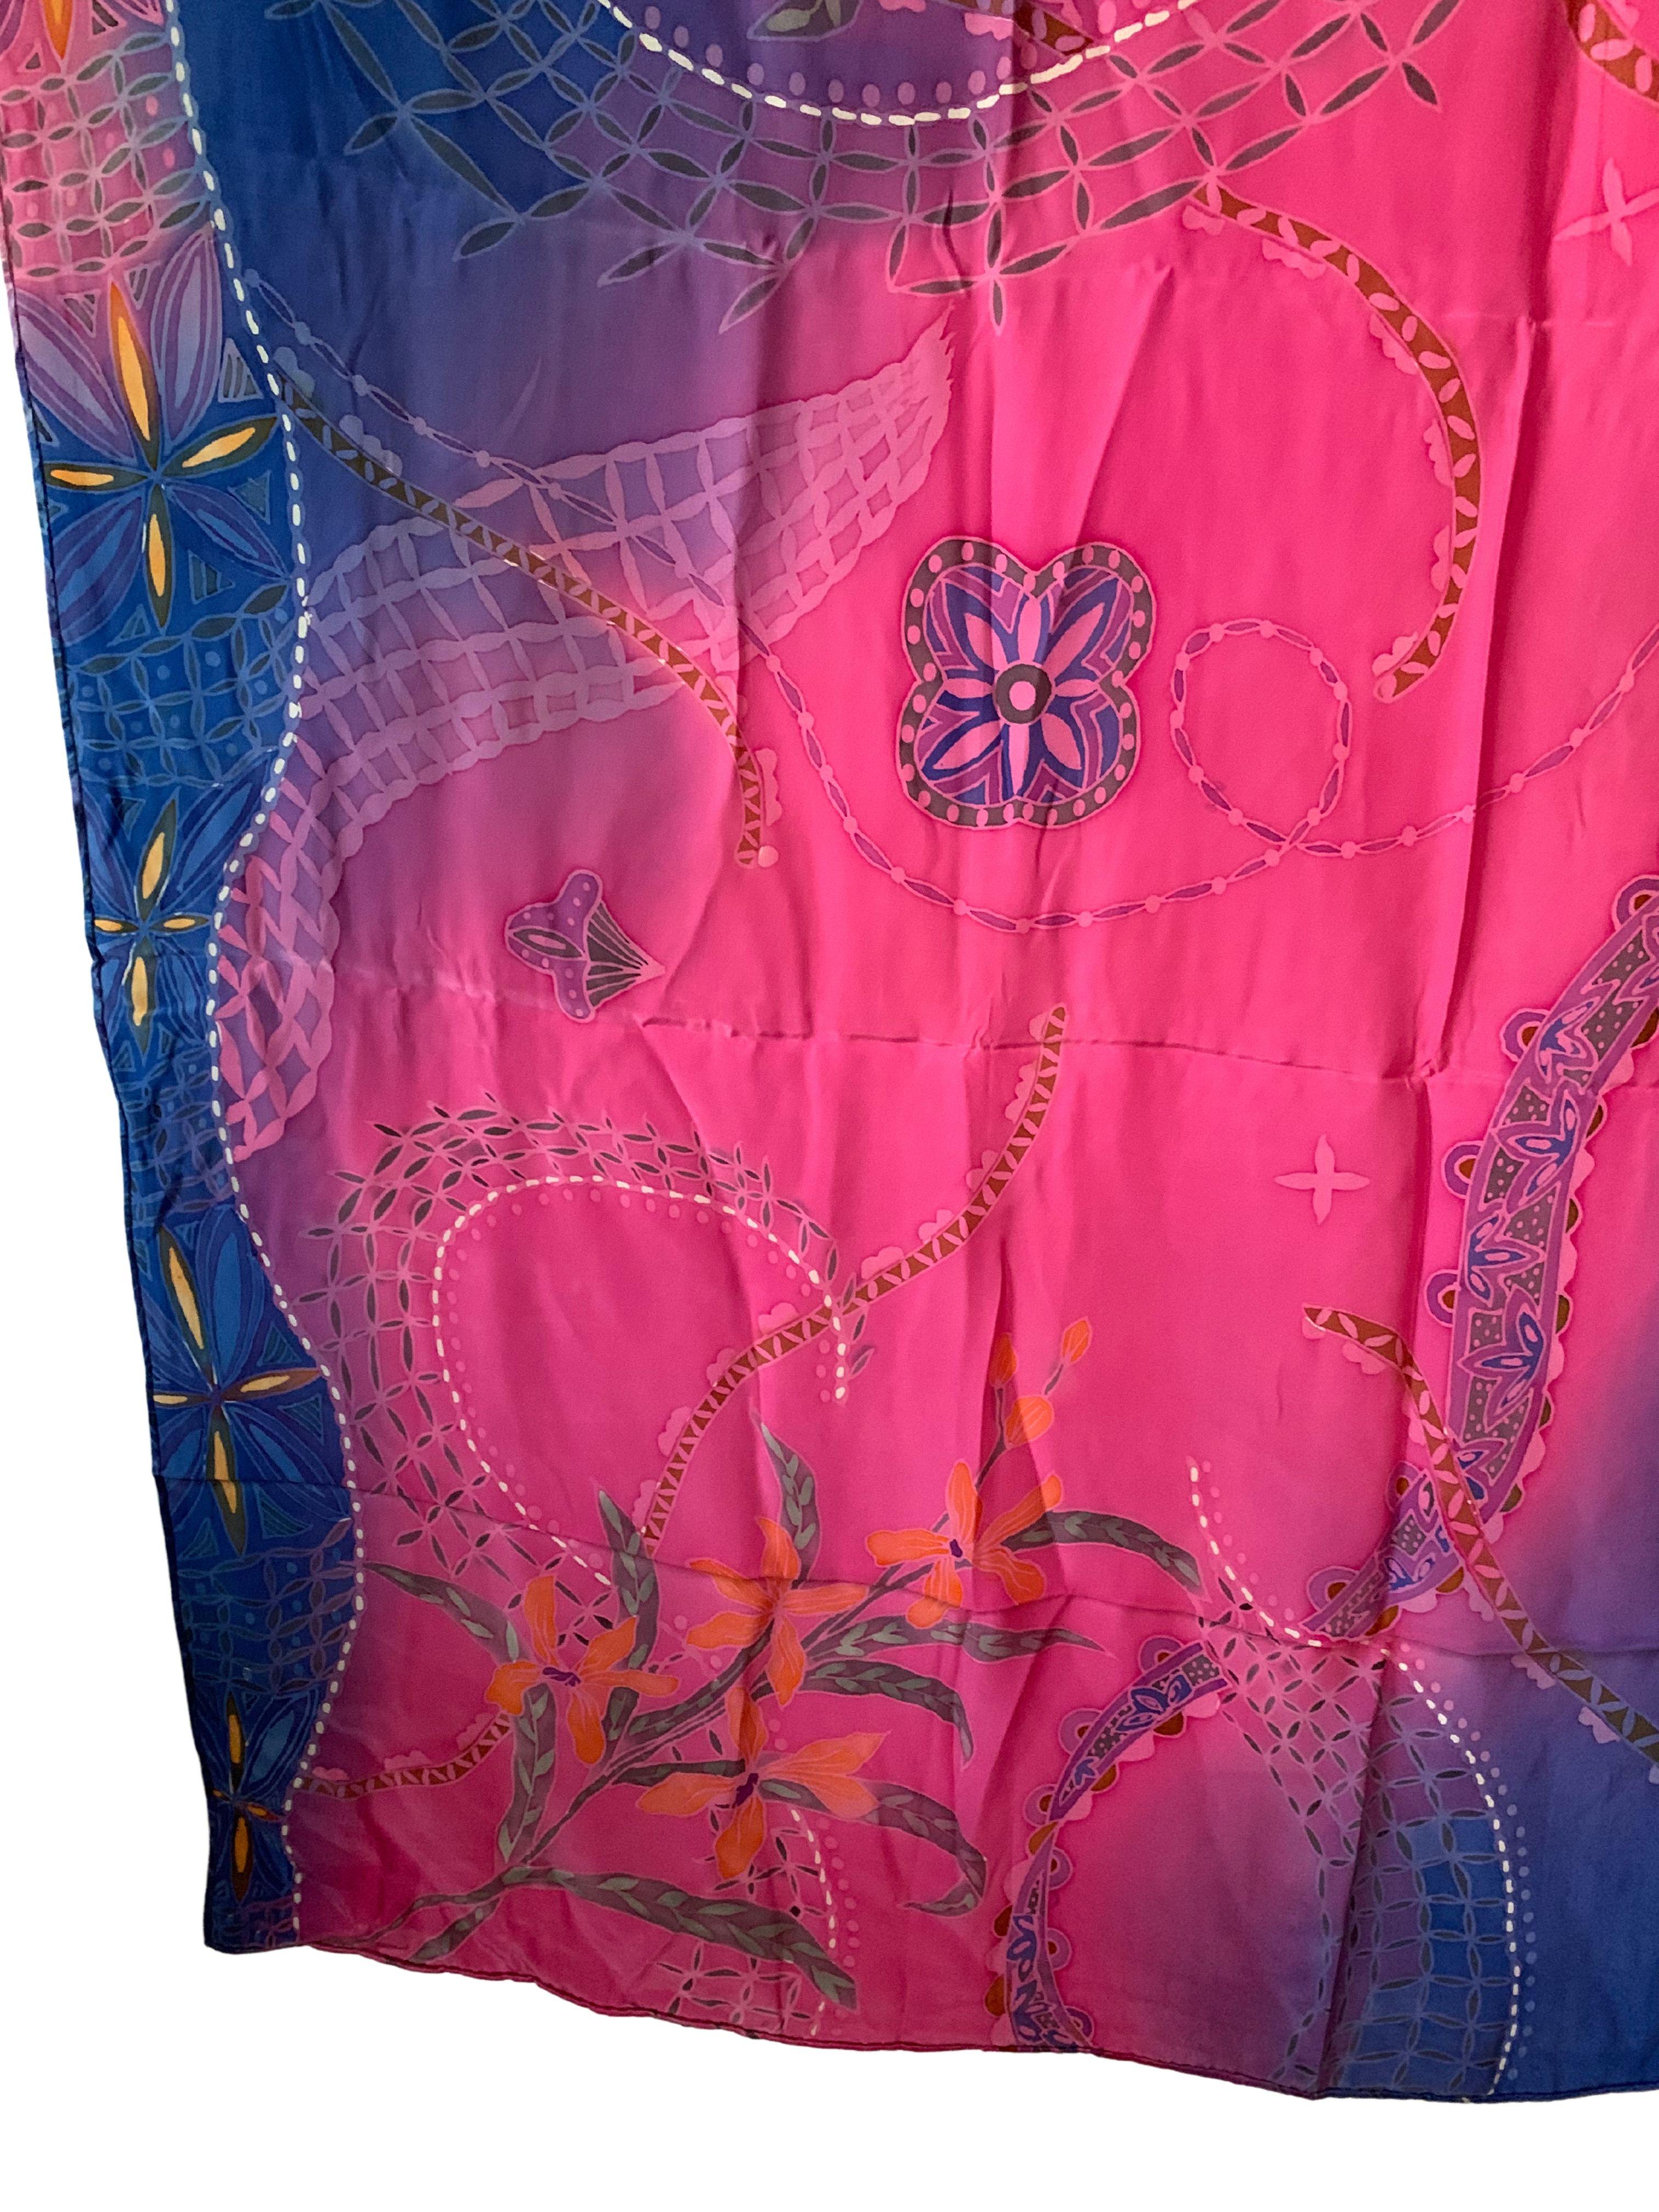 Hand-Crafted Silk Textile with Stunning Detailing For Sale 1